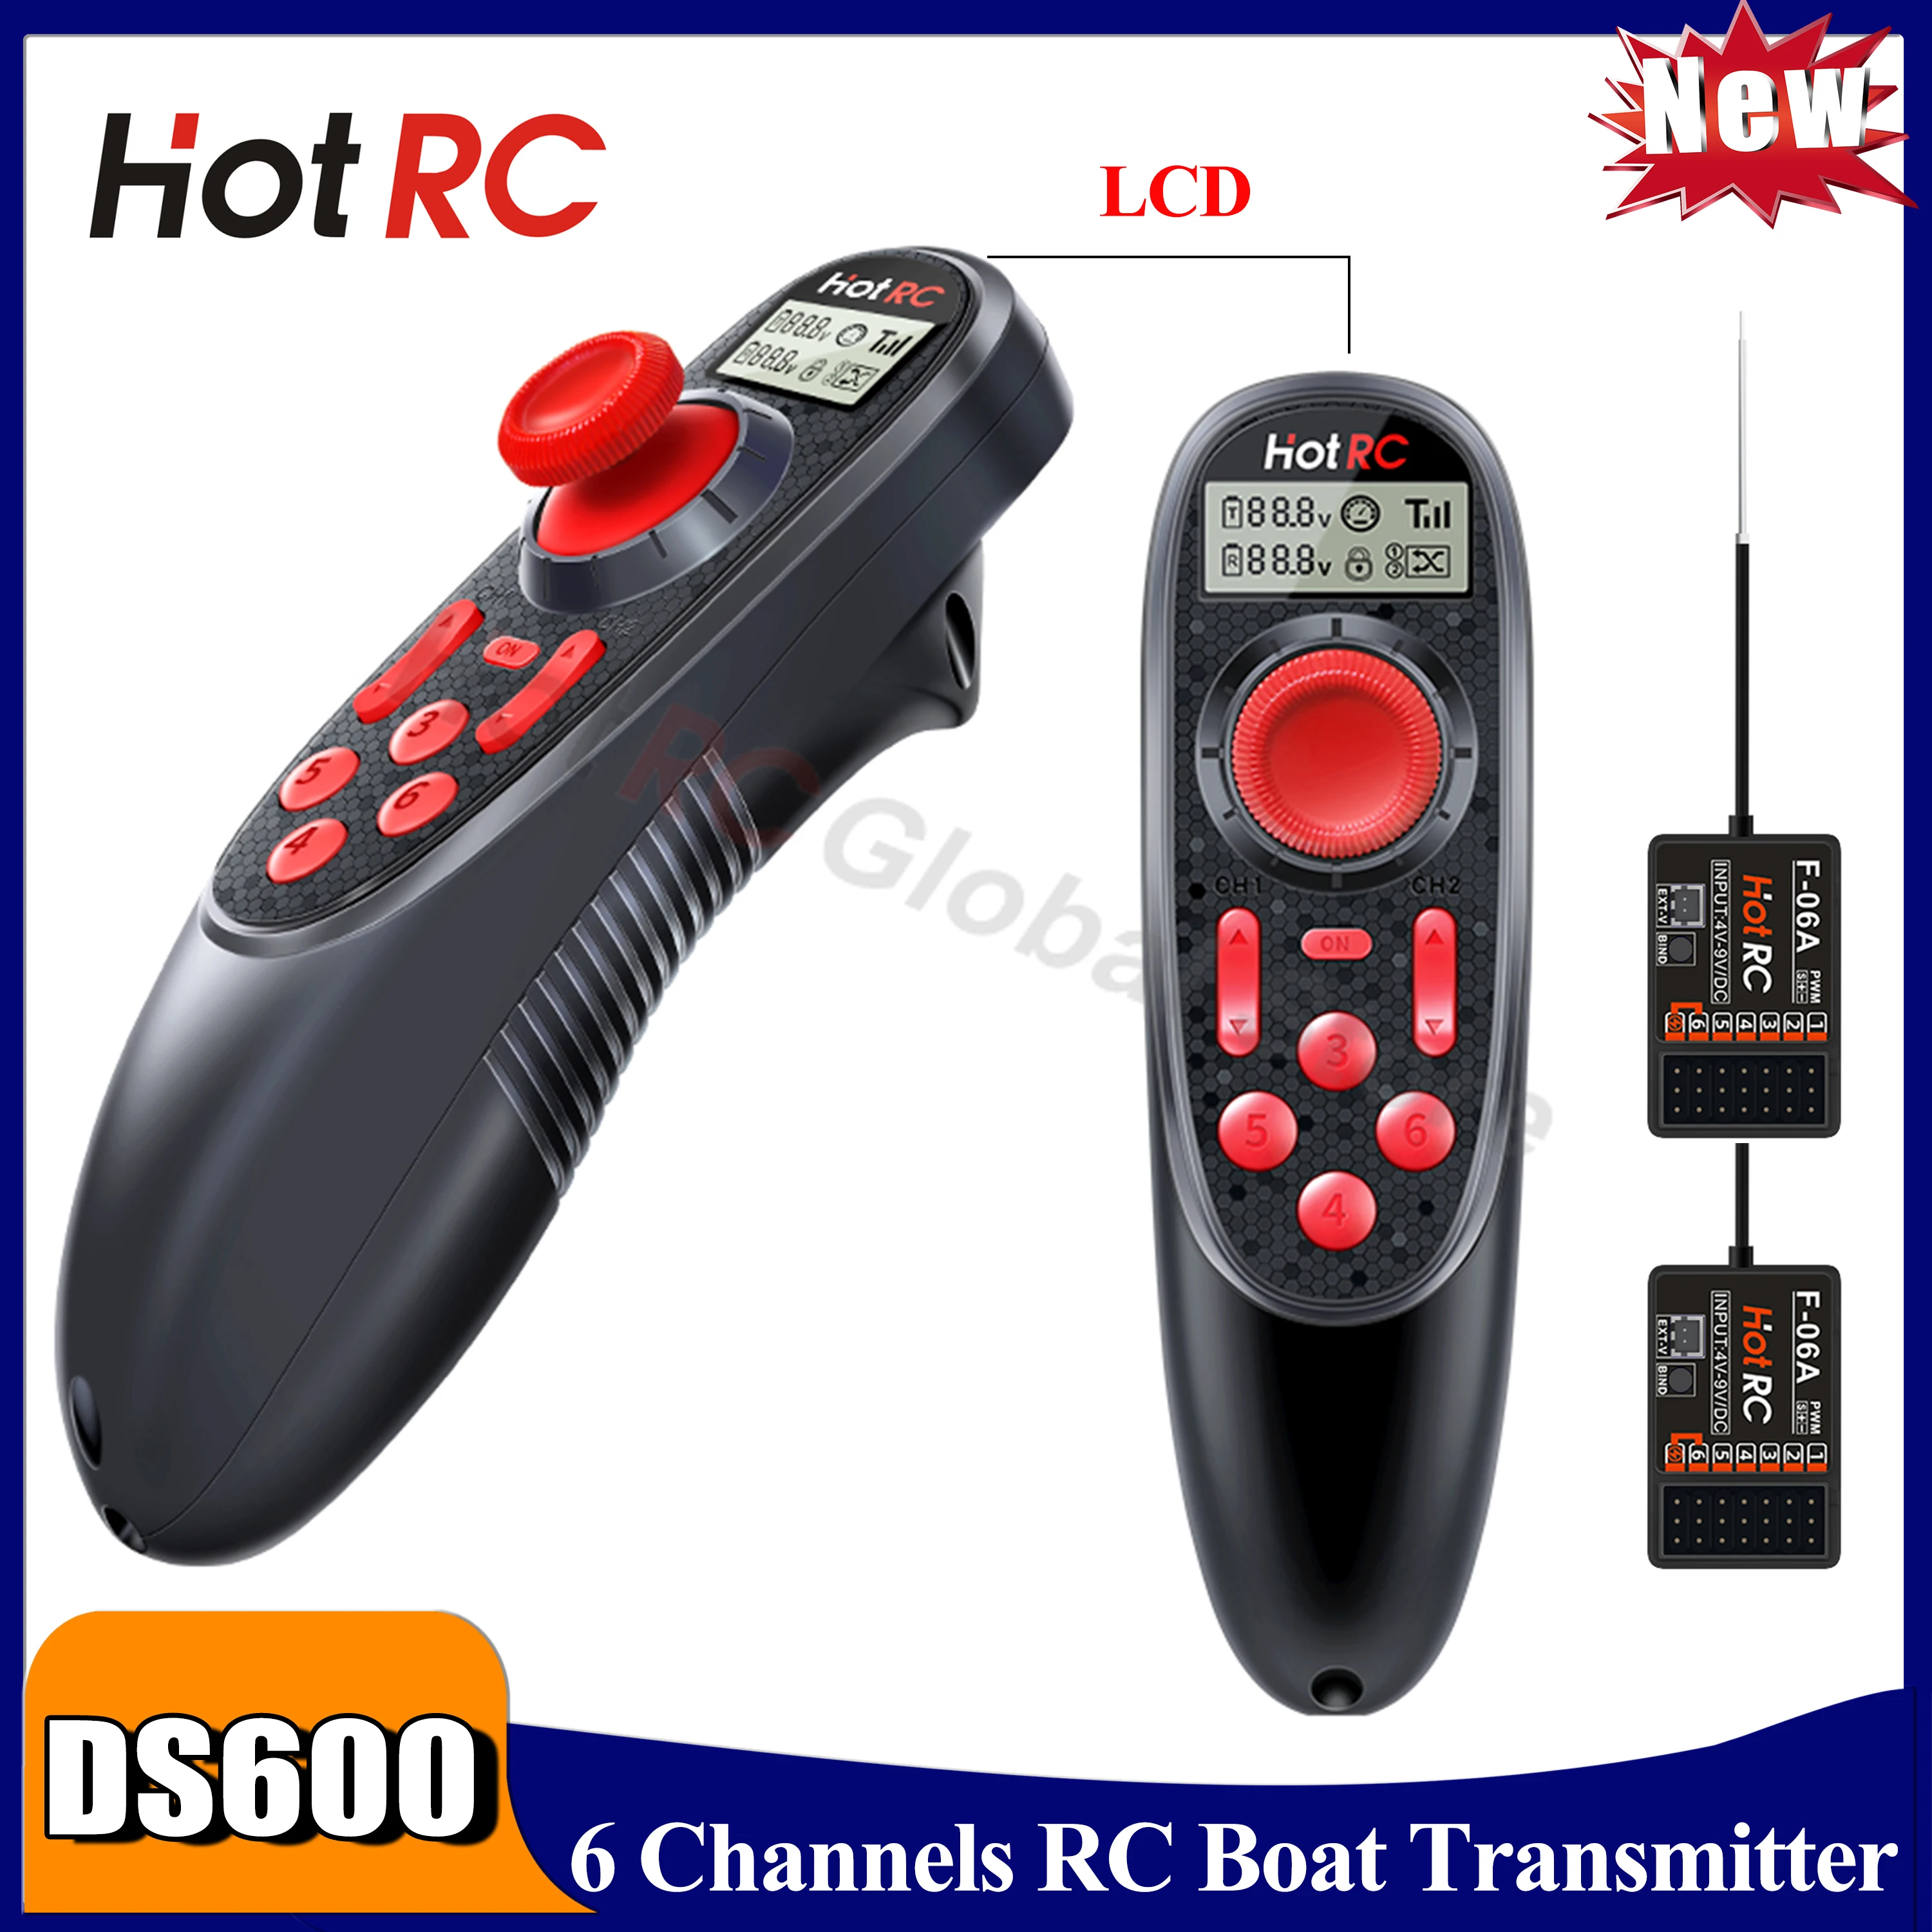 

HOTRC DS-600 DS600 CH 2.4GHz FHSS Radio System Transmitter Remote Controller PWM GFSK 6CH F-06A Receiver For RC Boat